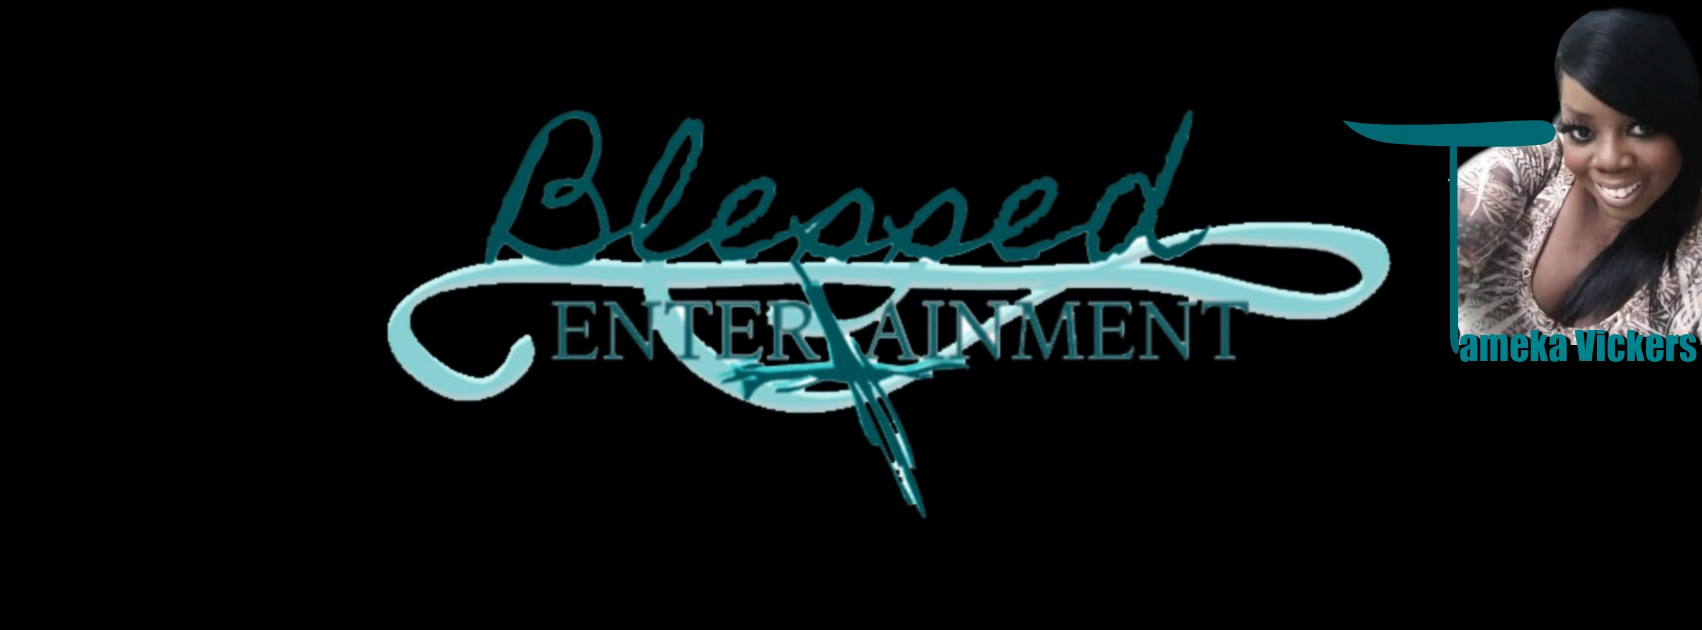 Blessed Entertainment Marketing and Promotions